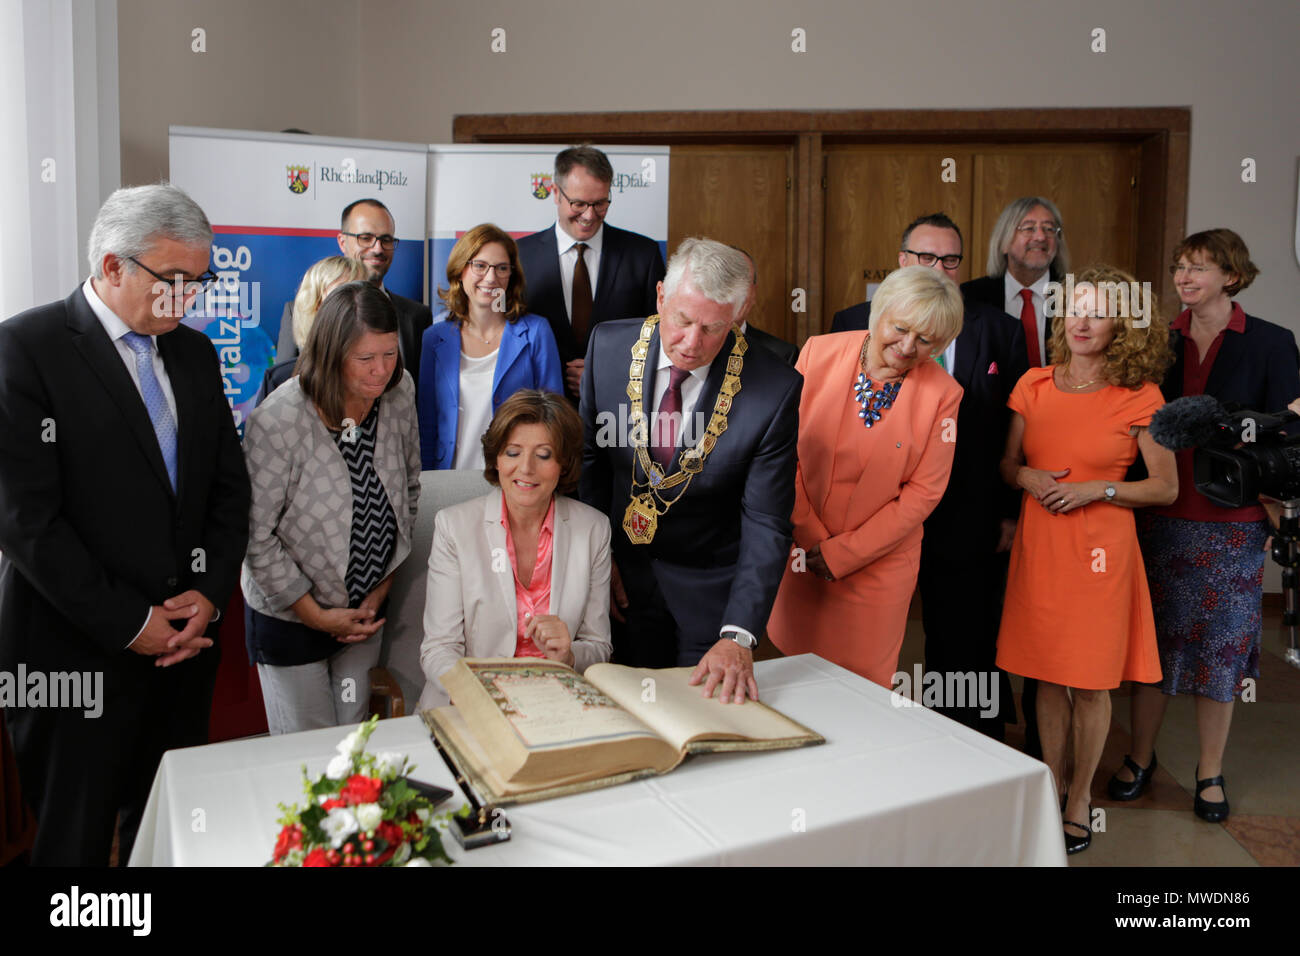 Worms, Germany. 1st June 2018. The Lord Mayor of Worms, Michael Kissel, shows Malu Dreyer, the Minister‐President of Rhineland-Palatinate, older entries in the Golden Book of the city of Worms. The Rhineland-Palatine cabinet of Minister‐President Malu Dreyer met in the City Hall in Worms, ahead of the opening of the Rheinland-Pfalz-Tag 2018. Malu Dreyer and her cabinet signed the Golden Book of the city of Worms after the meeting. Around 300.000 visitors are expected in the 34. . Credit: Michael Debets/Alamy Live News Stock Photo